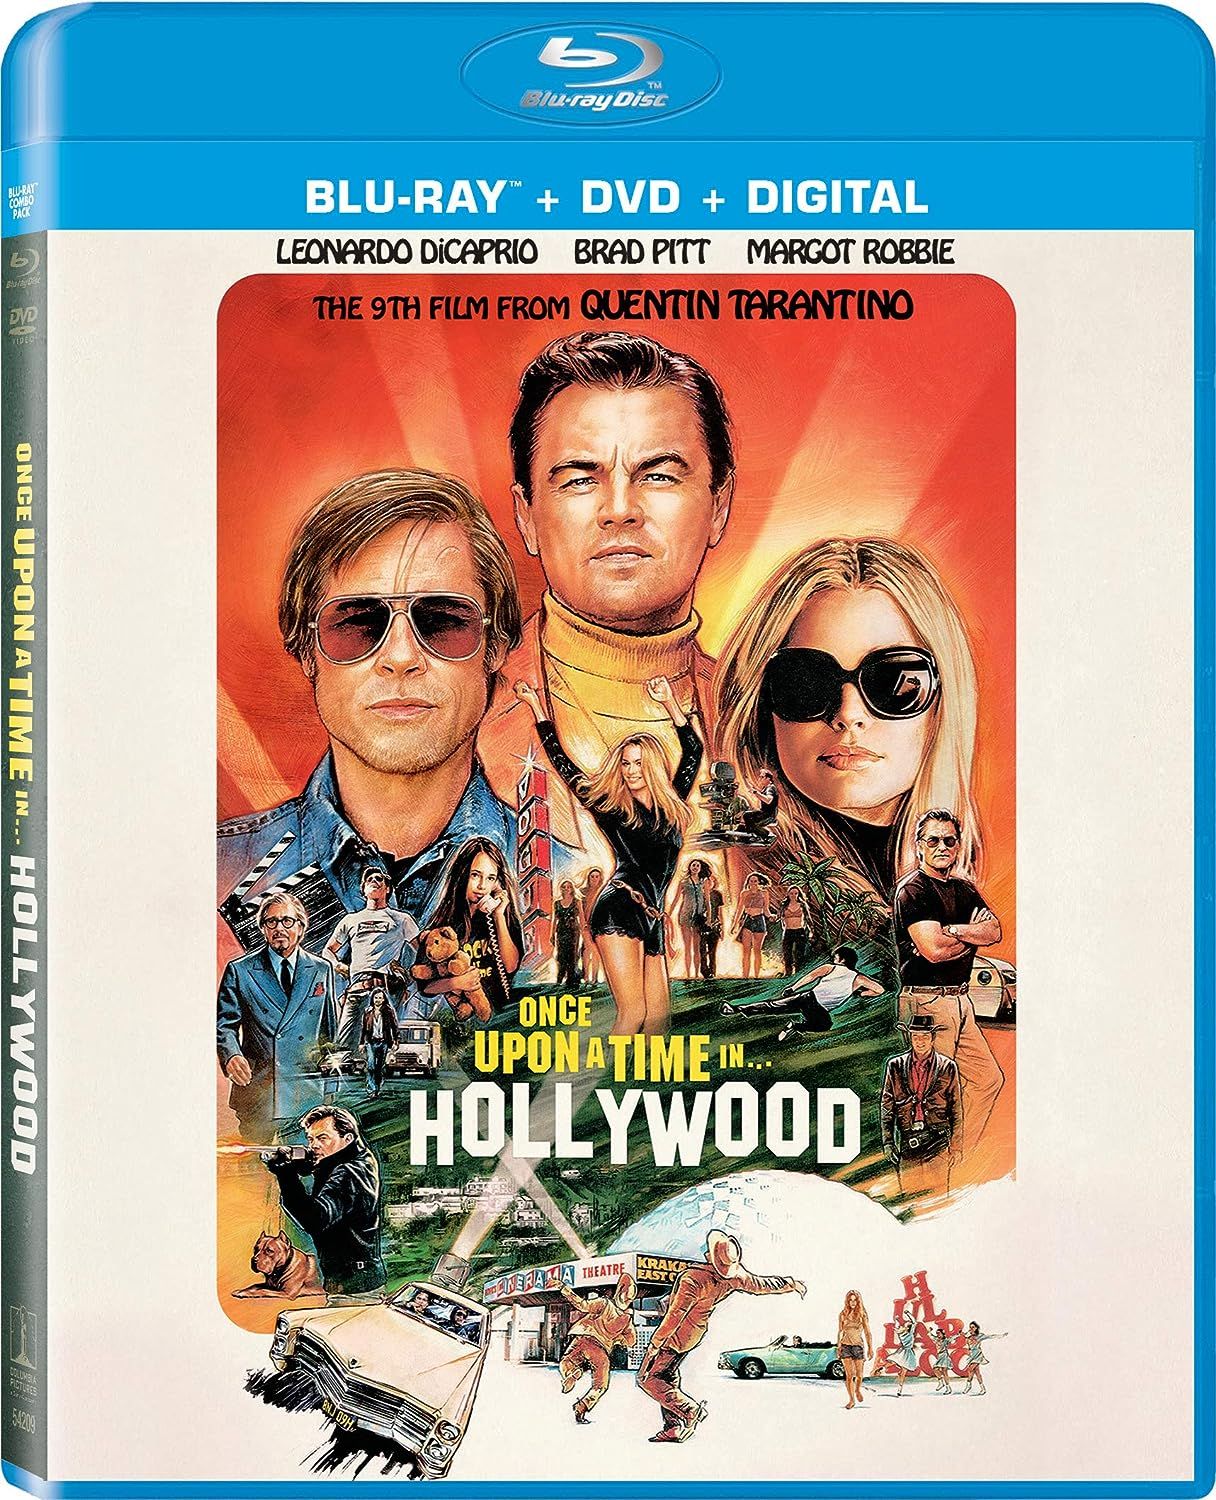 Once upon a Time in Hollywood